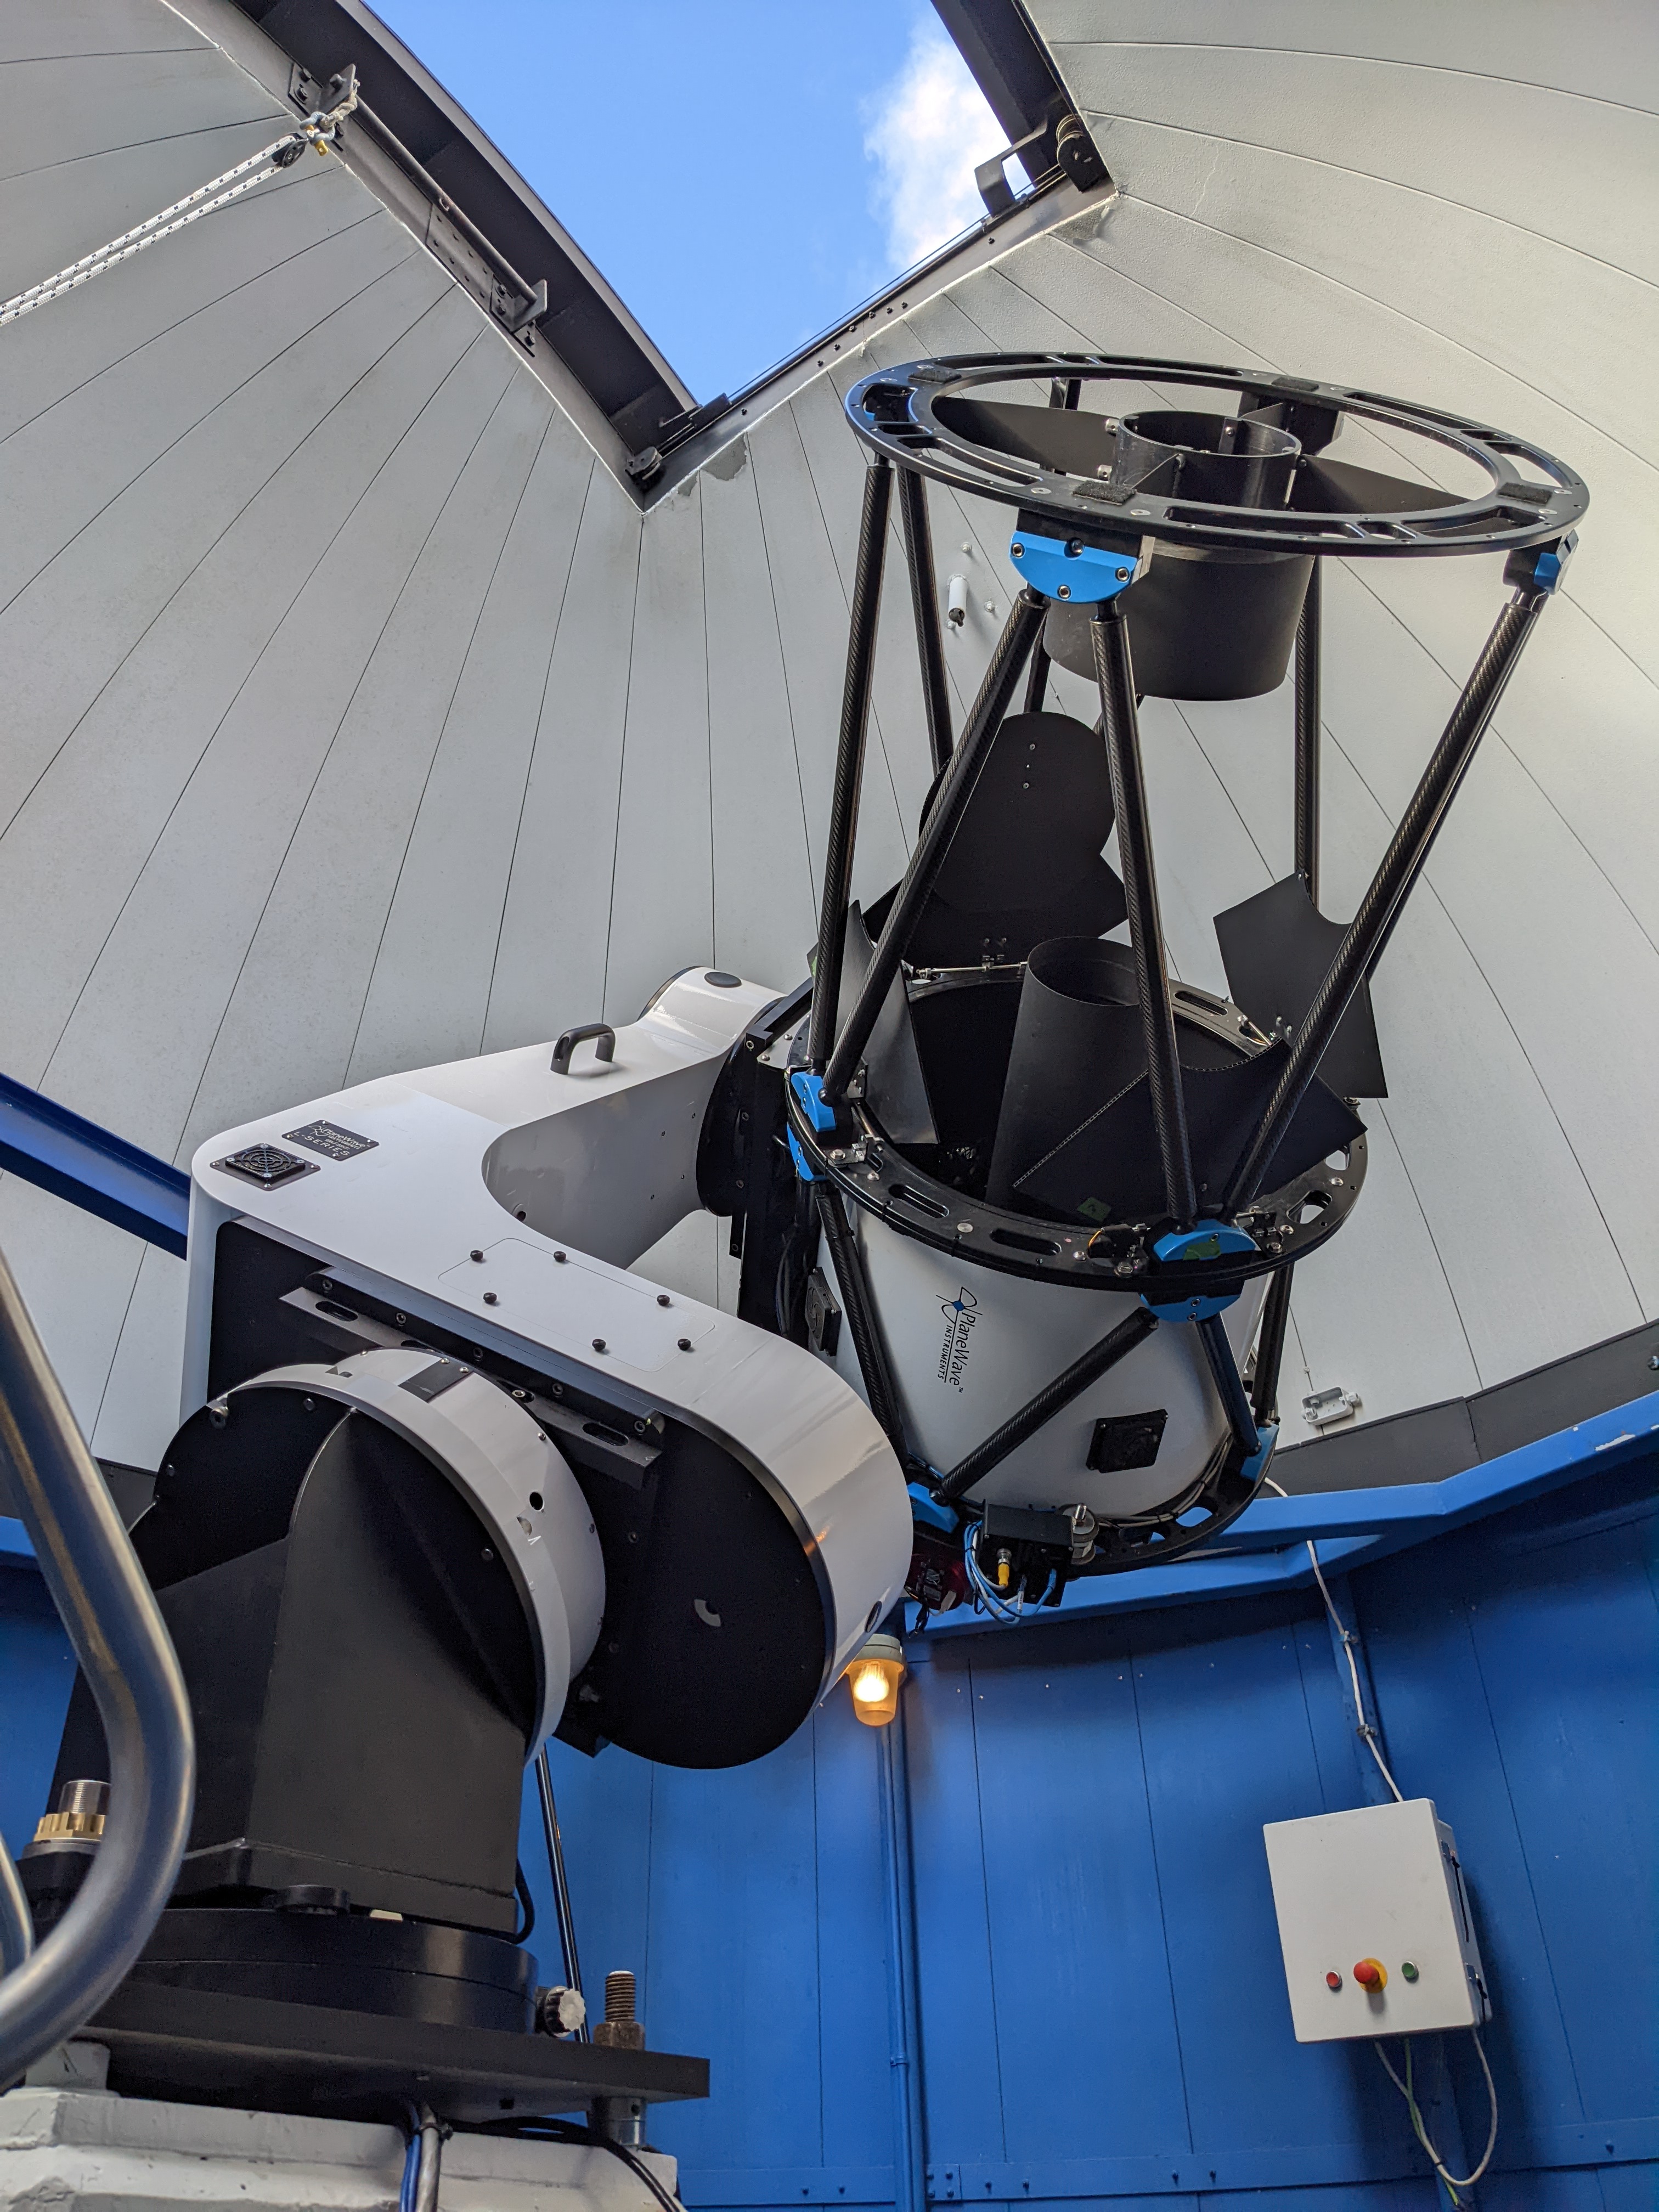 Image of the Dr. Ralph Medjuck Telescope under the sunlight at the Burke-Gaffney Observatory